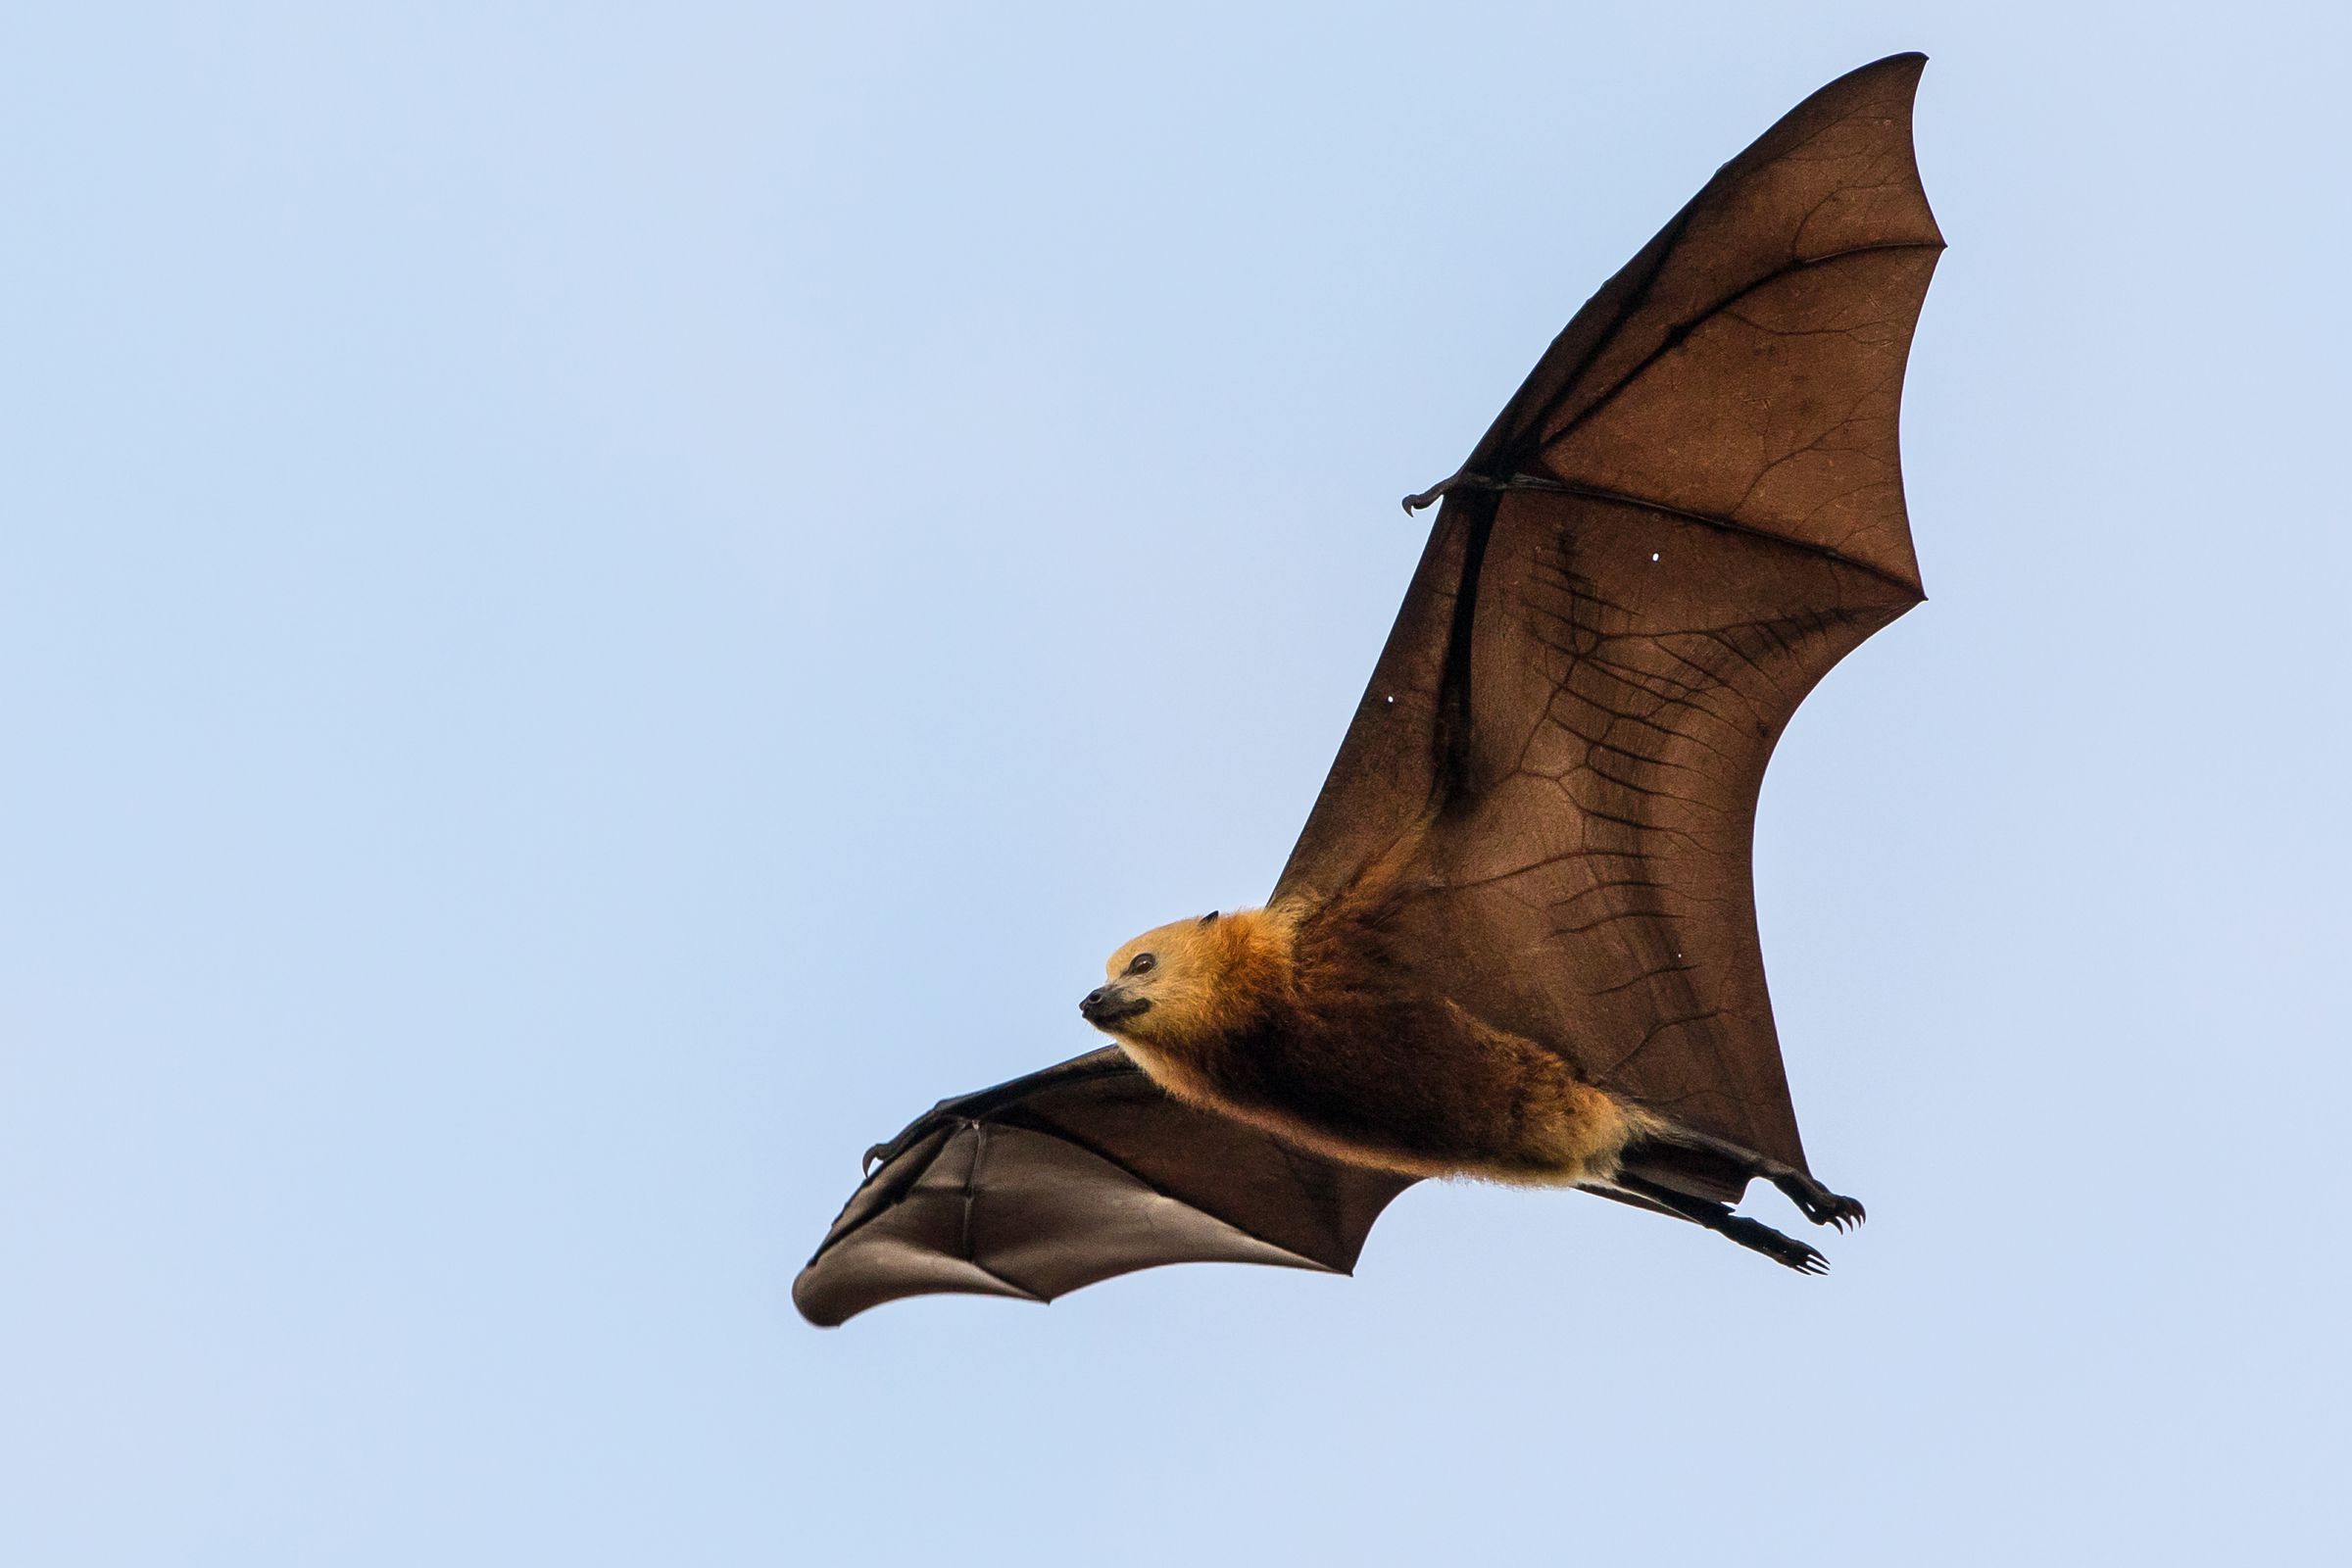 The Greater Mascarene flying fox (Pteropus niger), a threatened key pollinator and seed disperser on Mauritius.